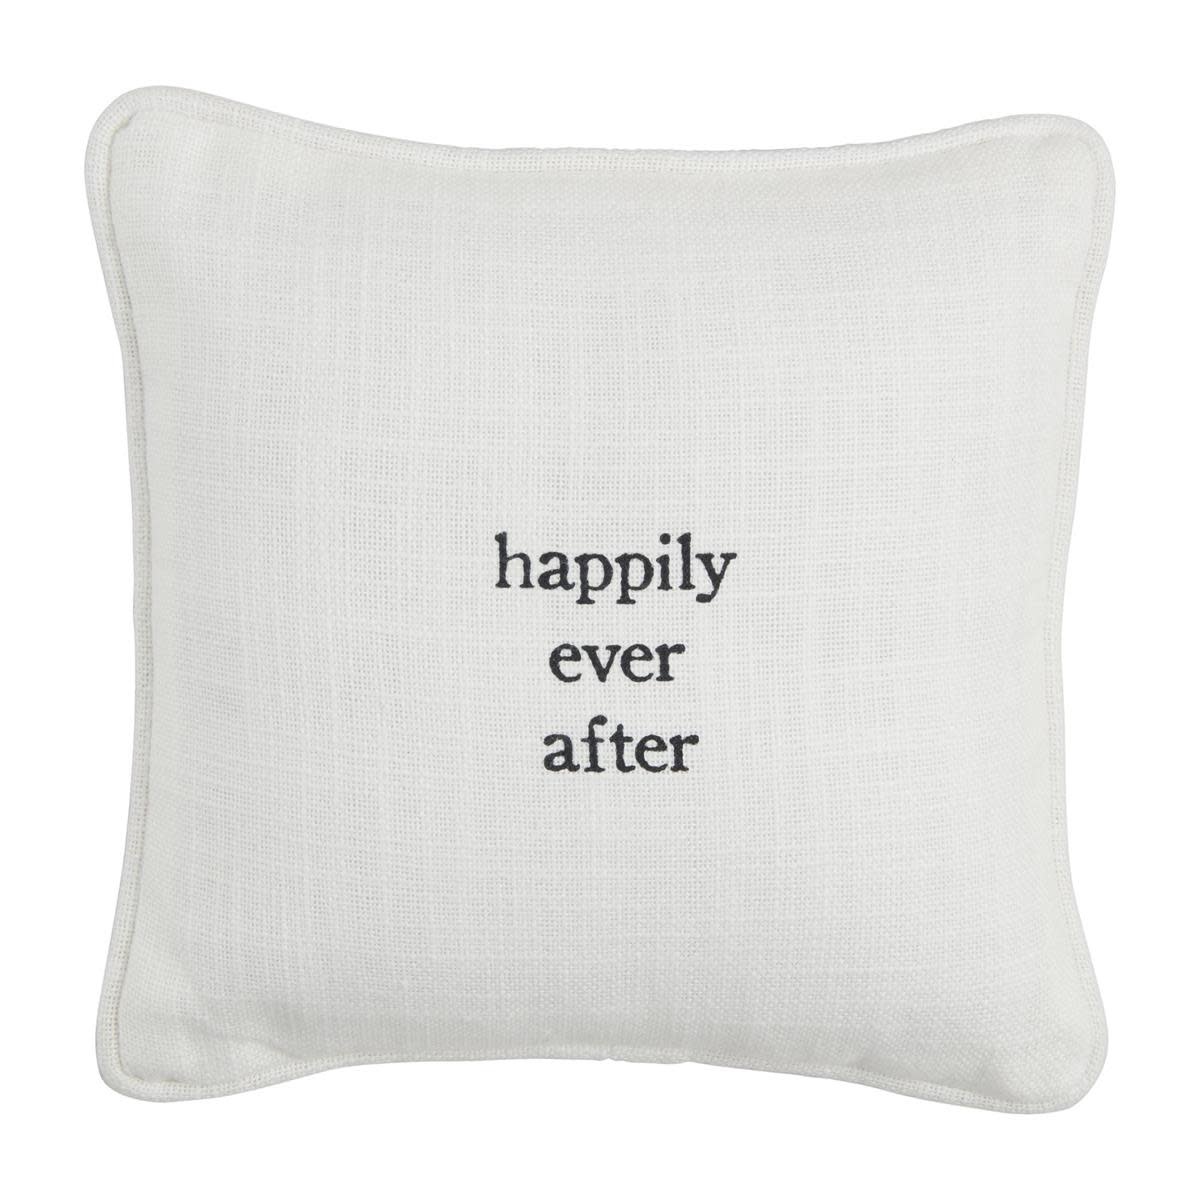 Mud Pie Happily Ever After Mini Pillow